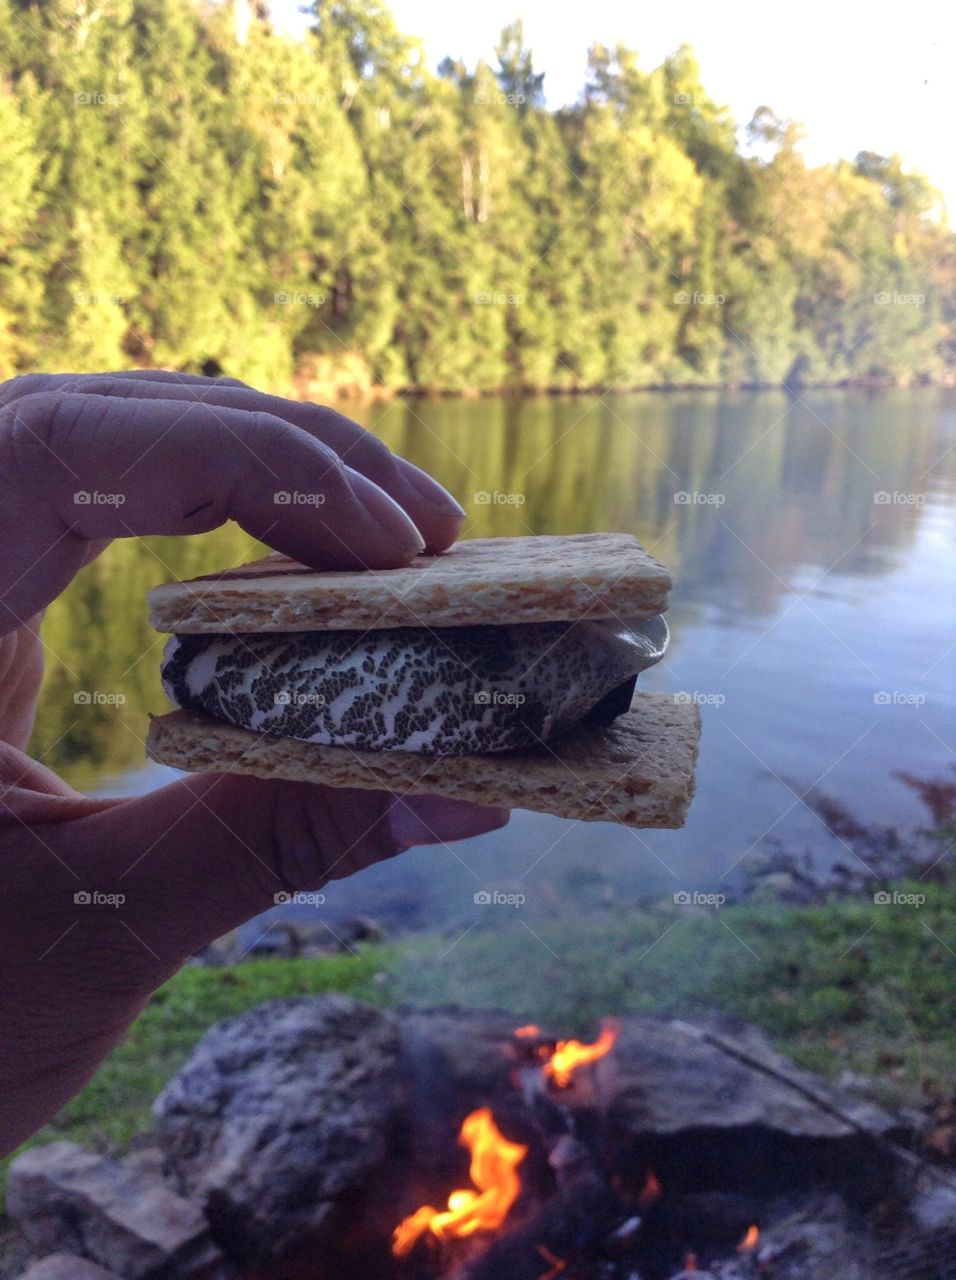 S'more . Nothing beats a perfect s'mores at the cottage.